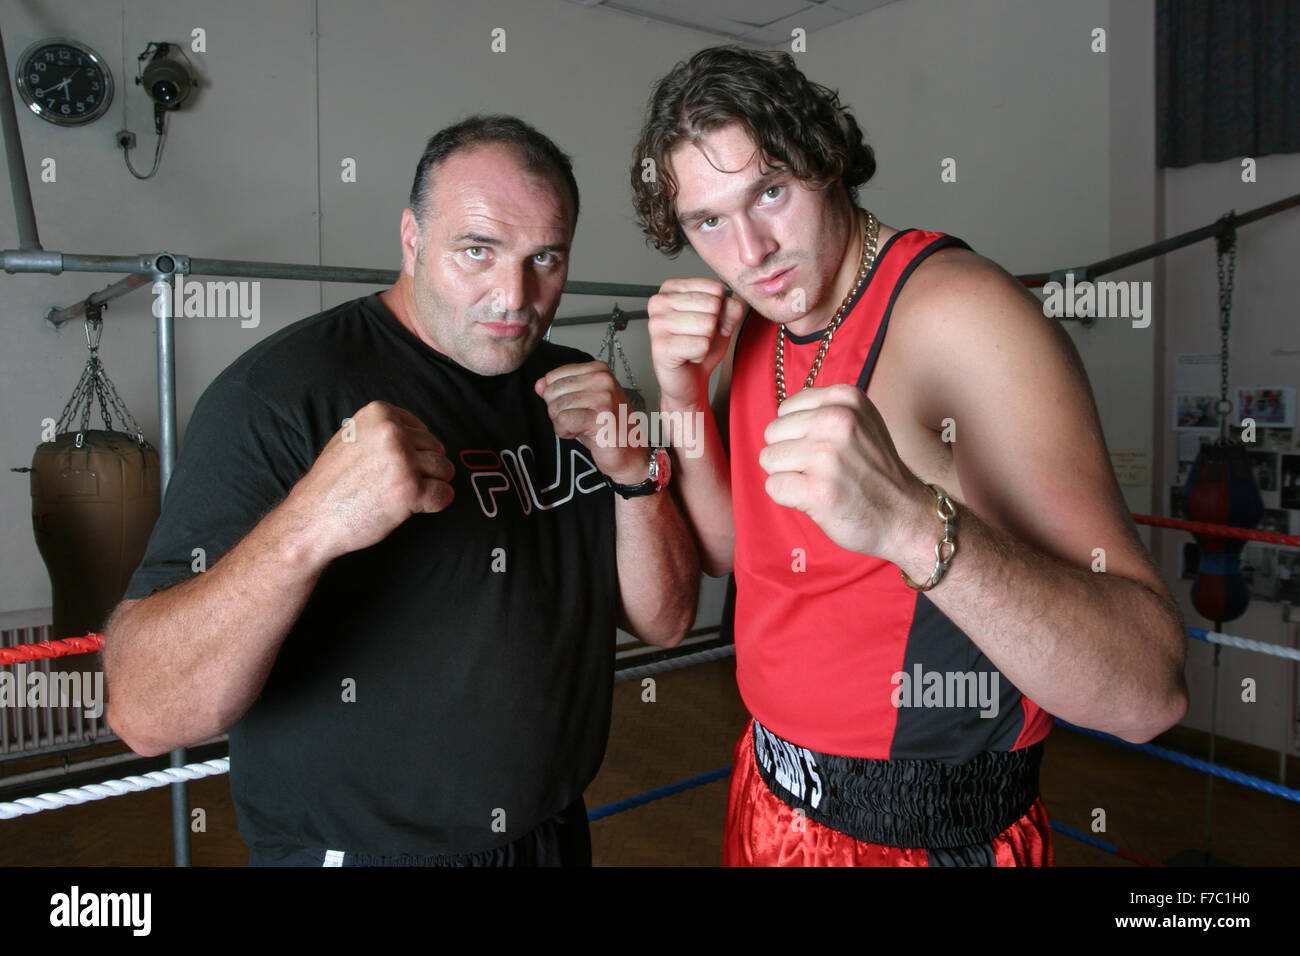 tyson-fury-at-18-years-old-and-father-john-fury-F7C1H0.jpg